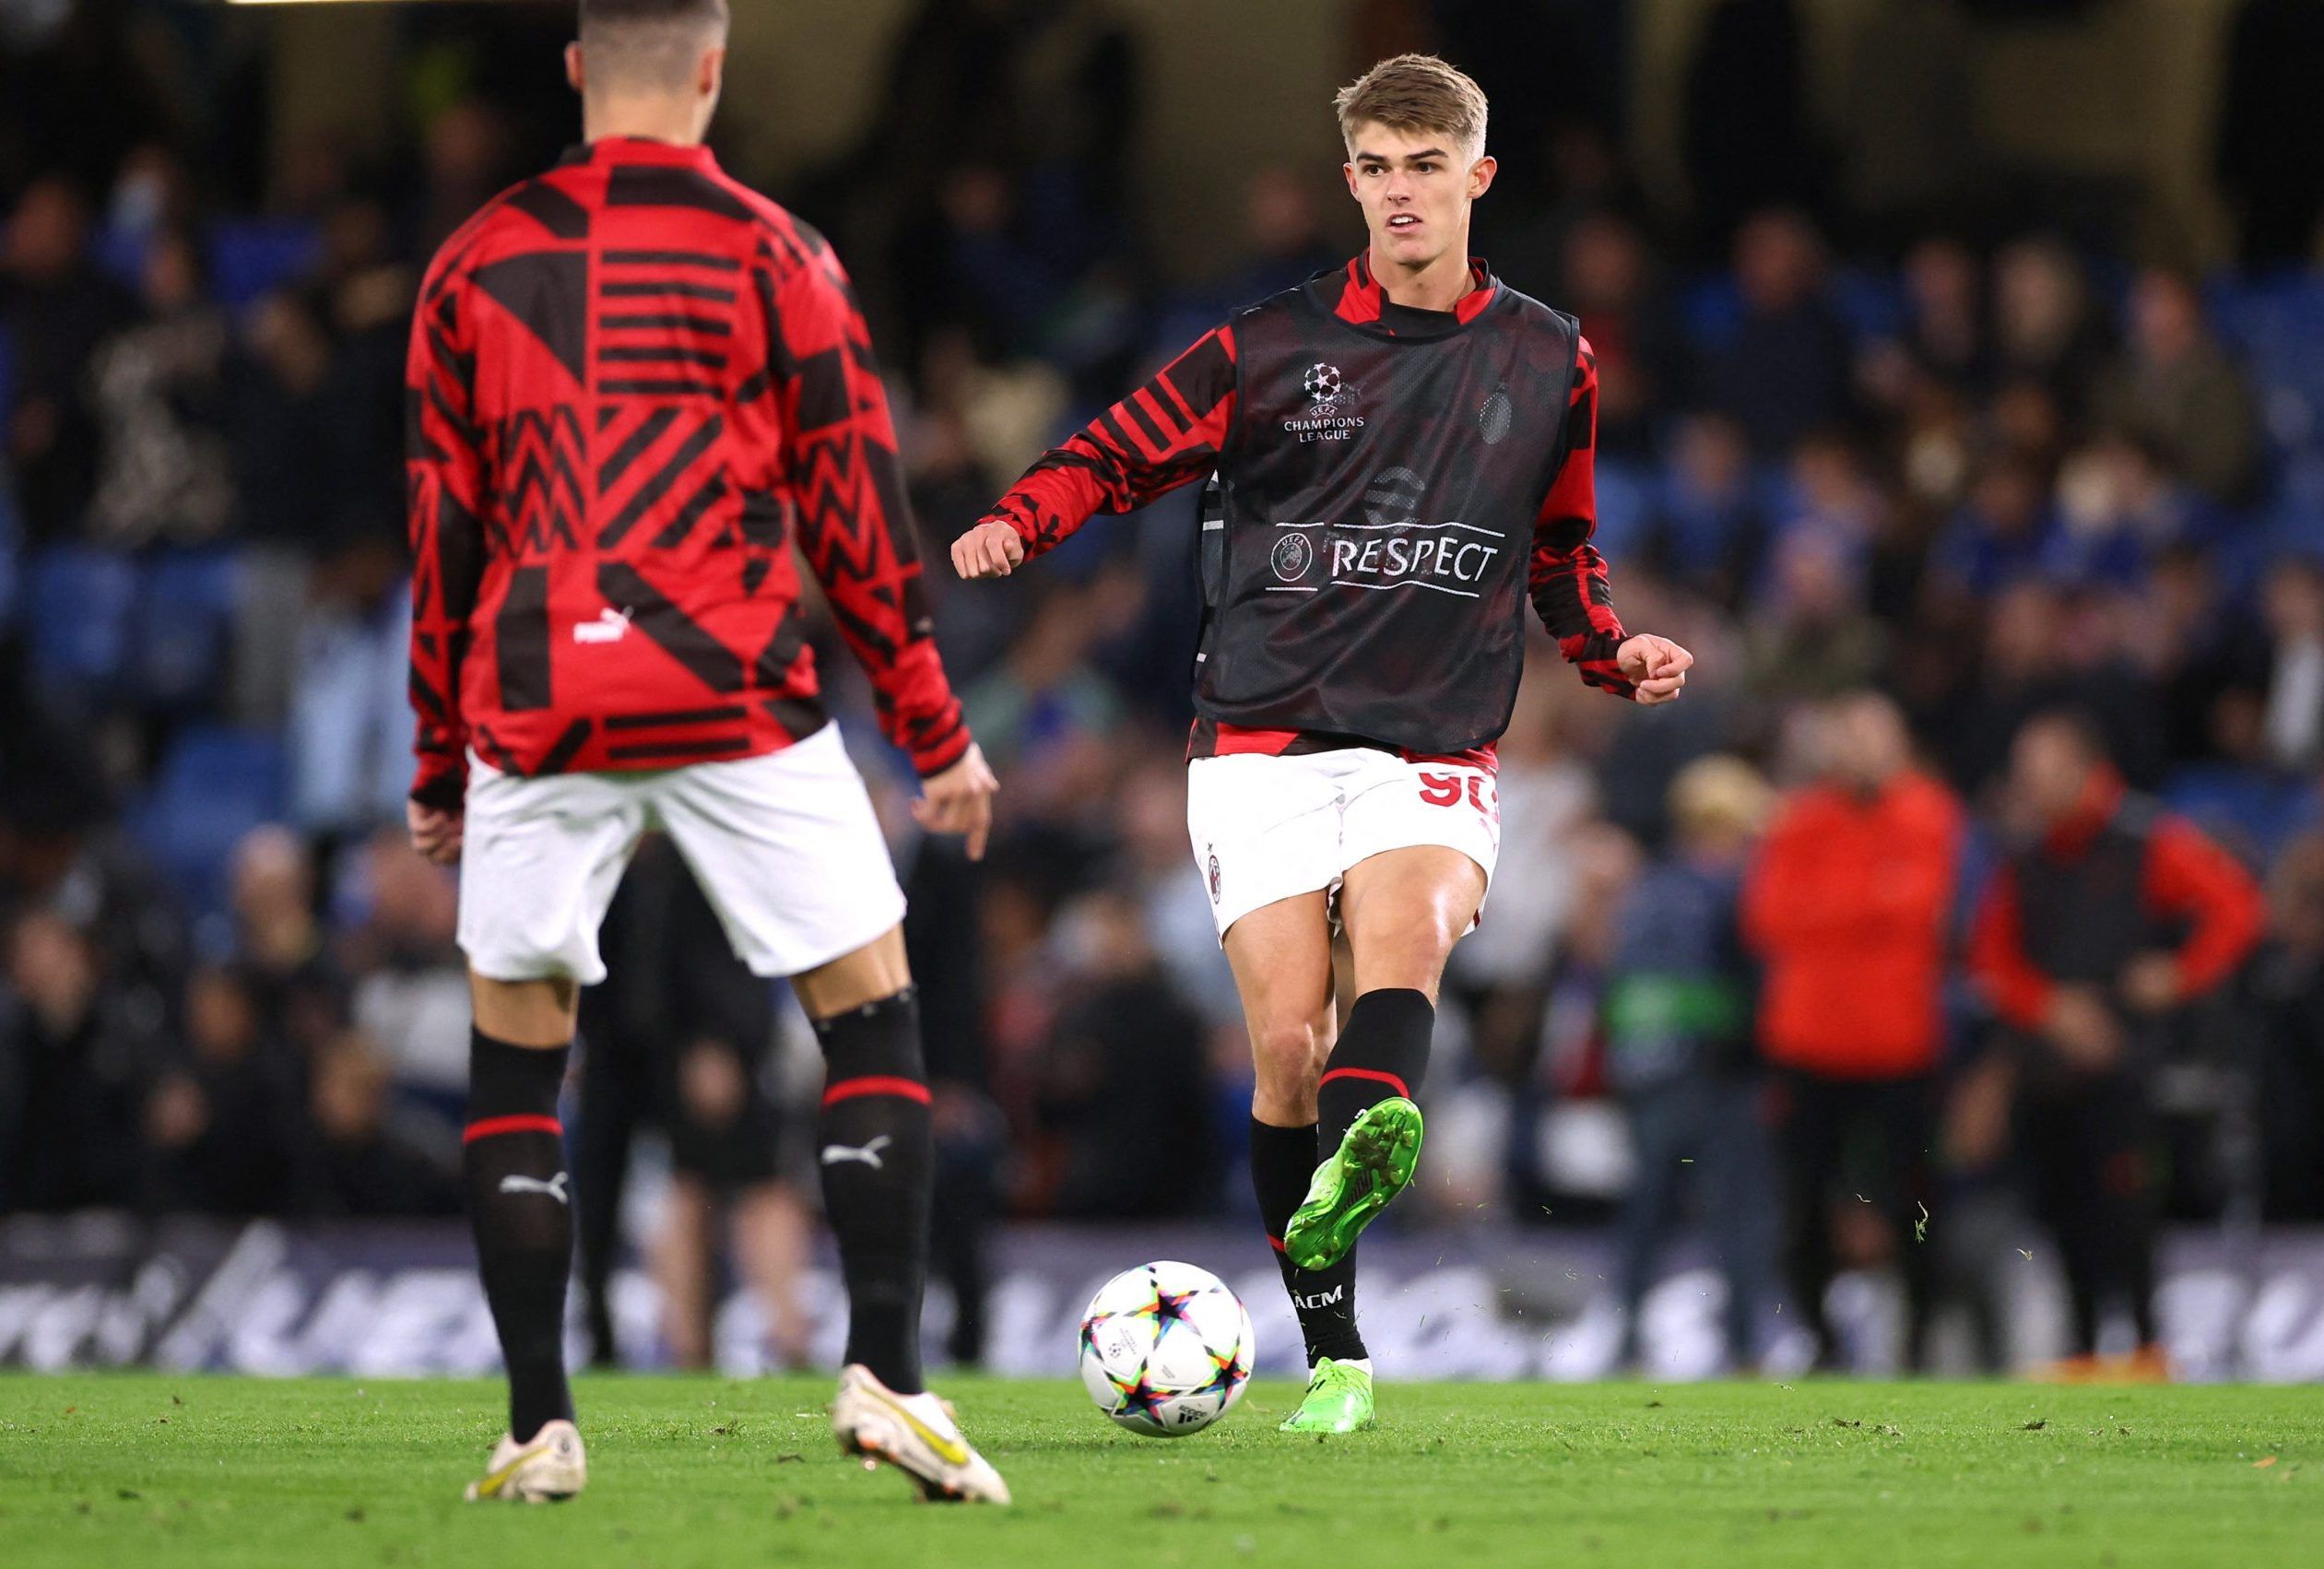 AC Milan's Charles De Ketelaere during the warm up before the match